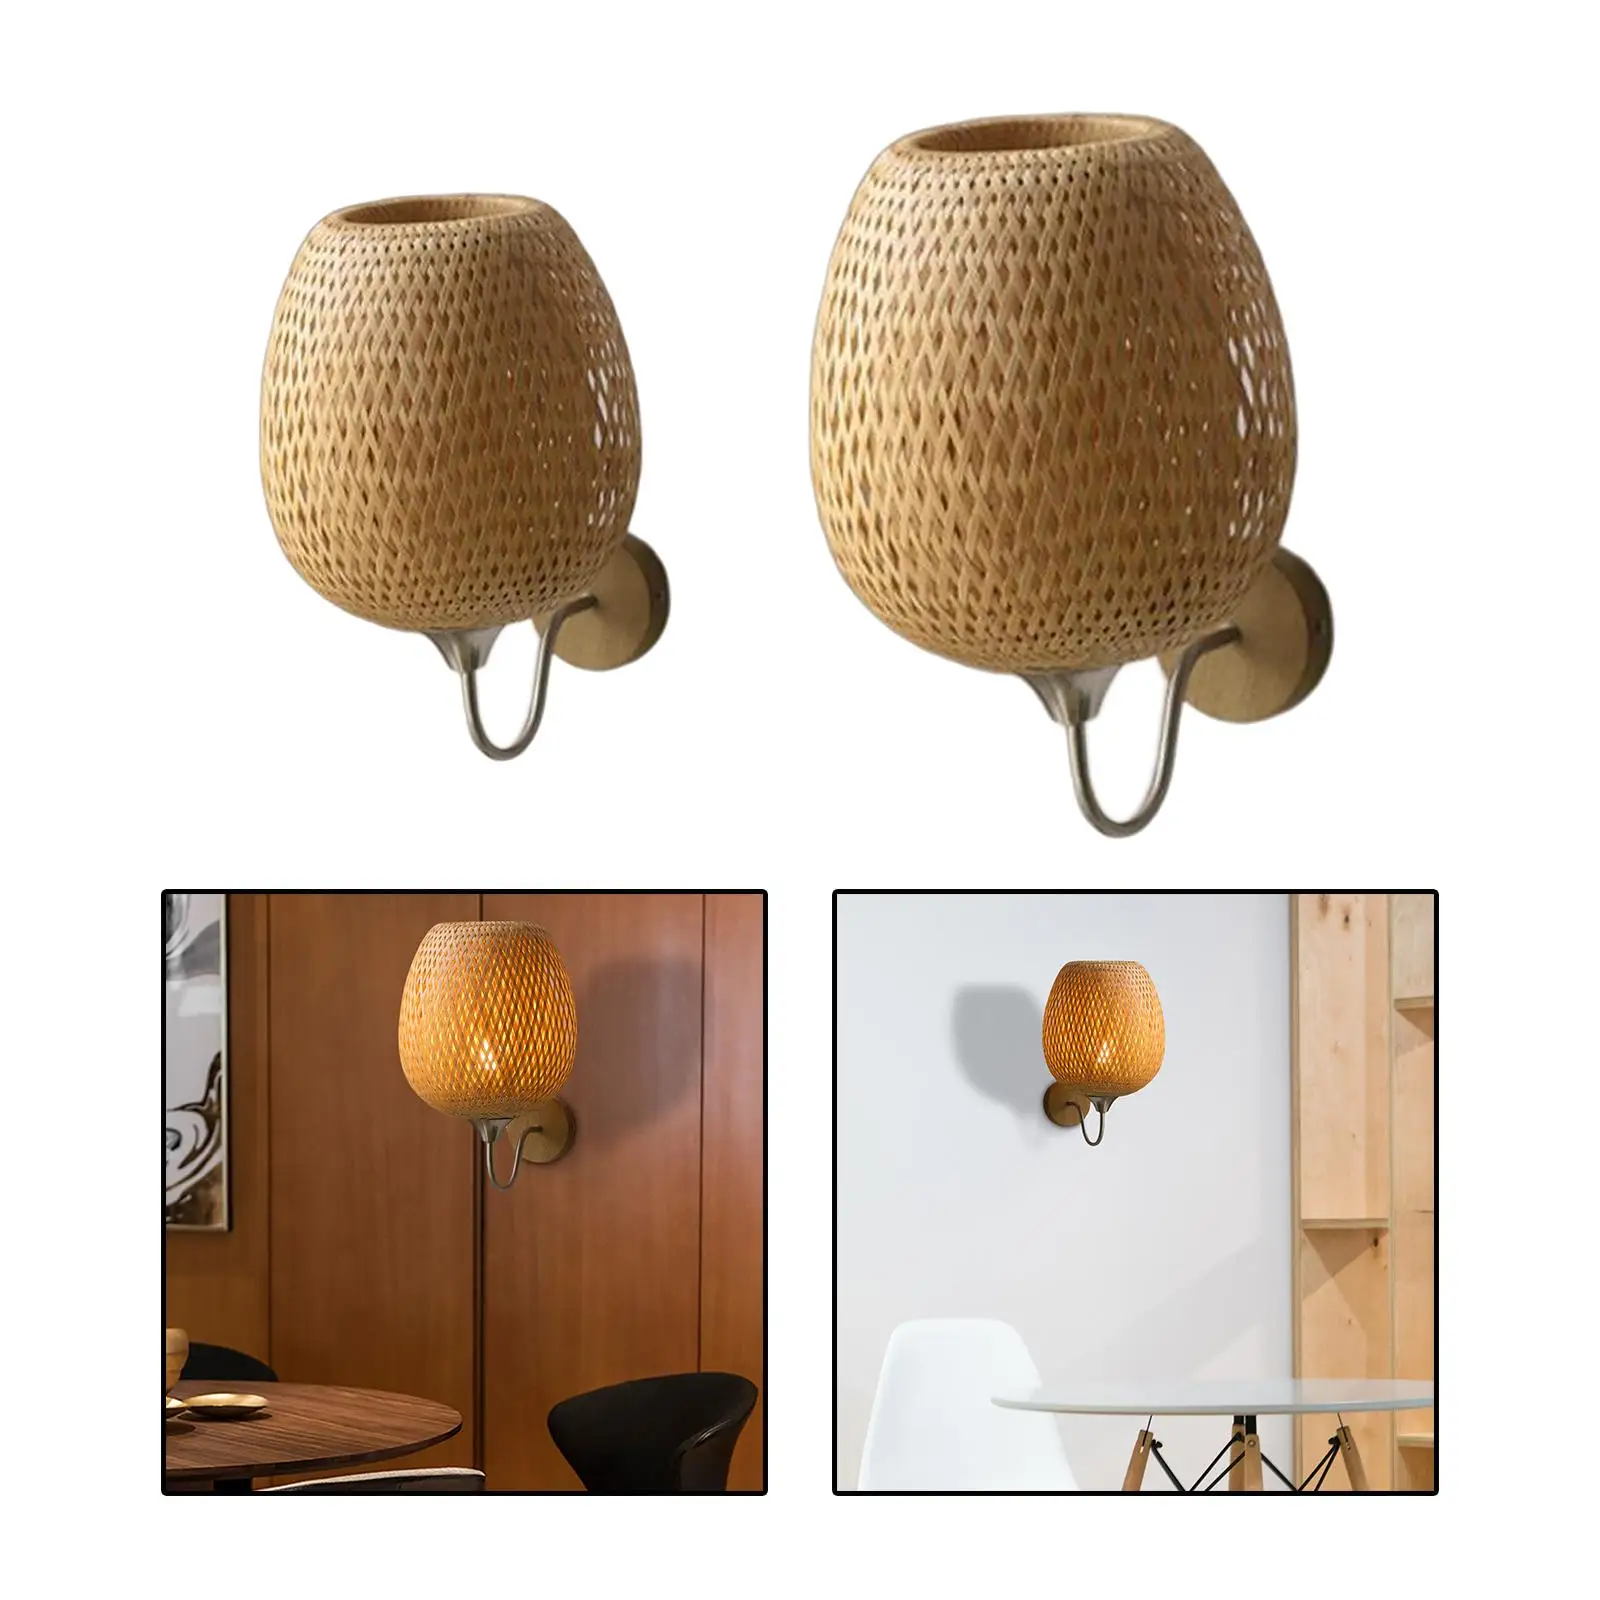 Rattan Bamboo Wall Sconce Light Fixture Rustic for Indoor Living Room Porch